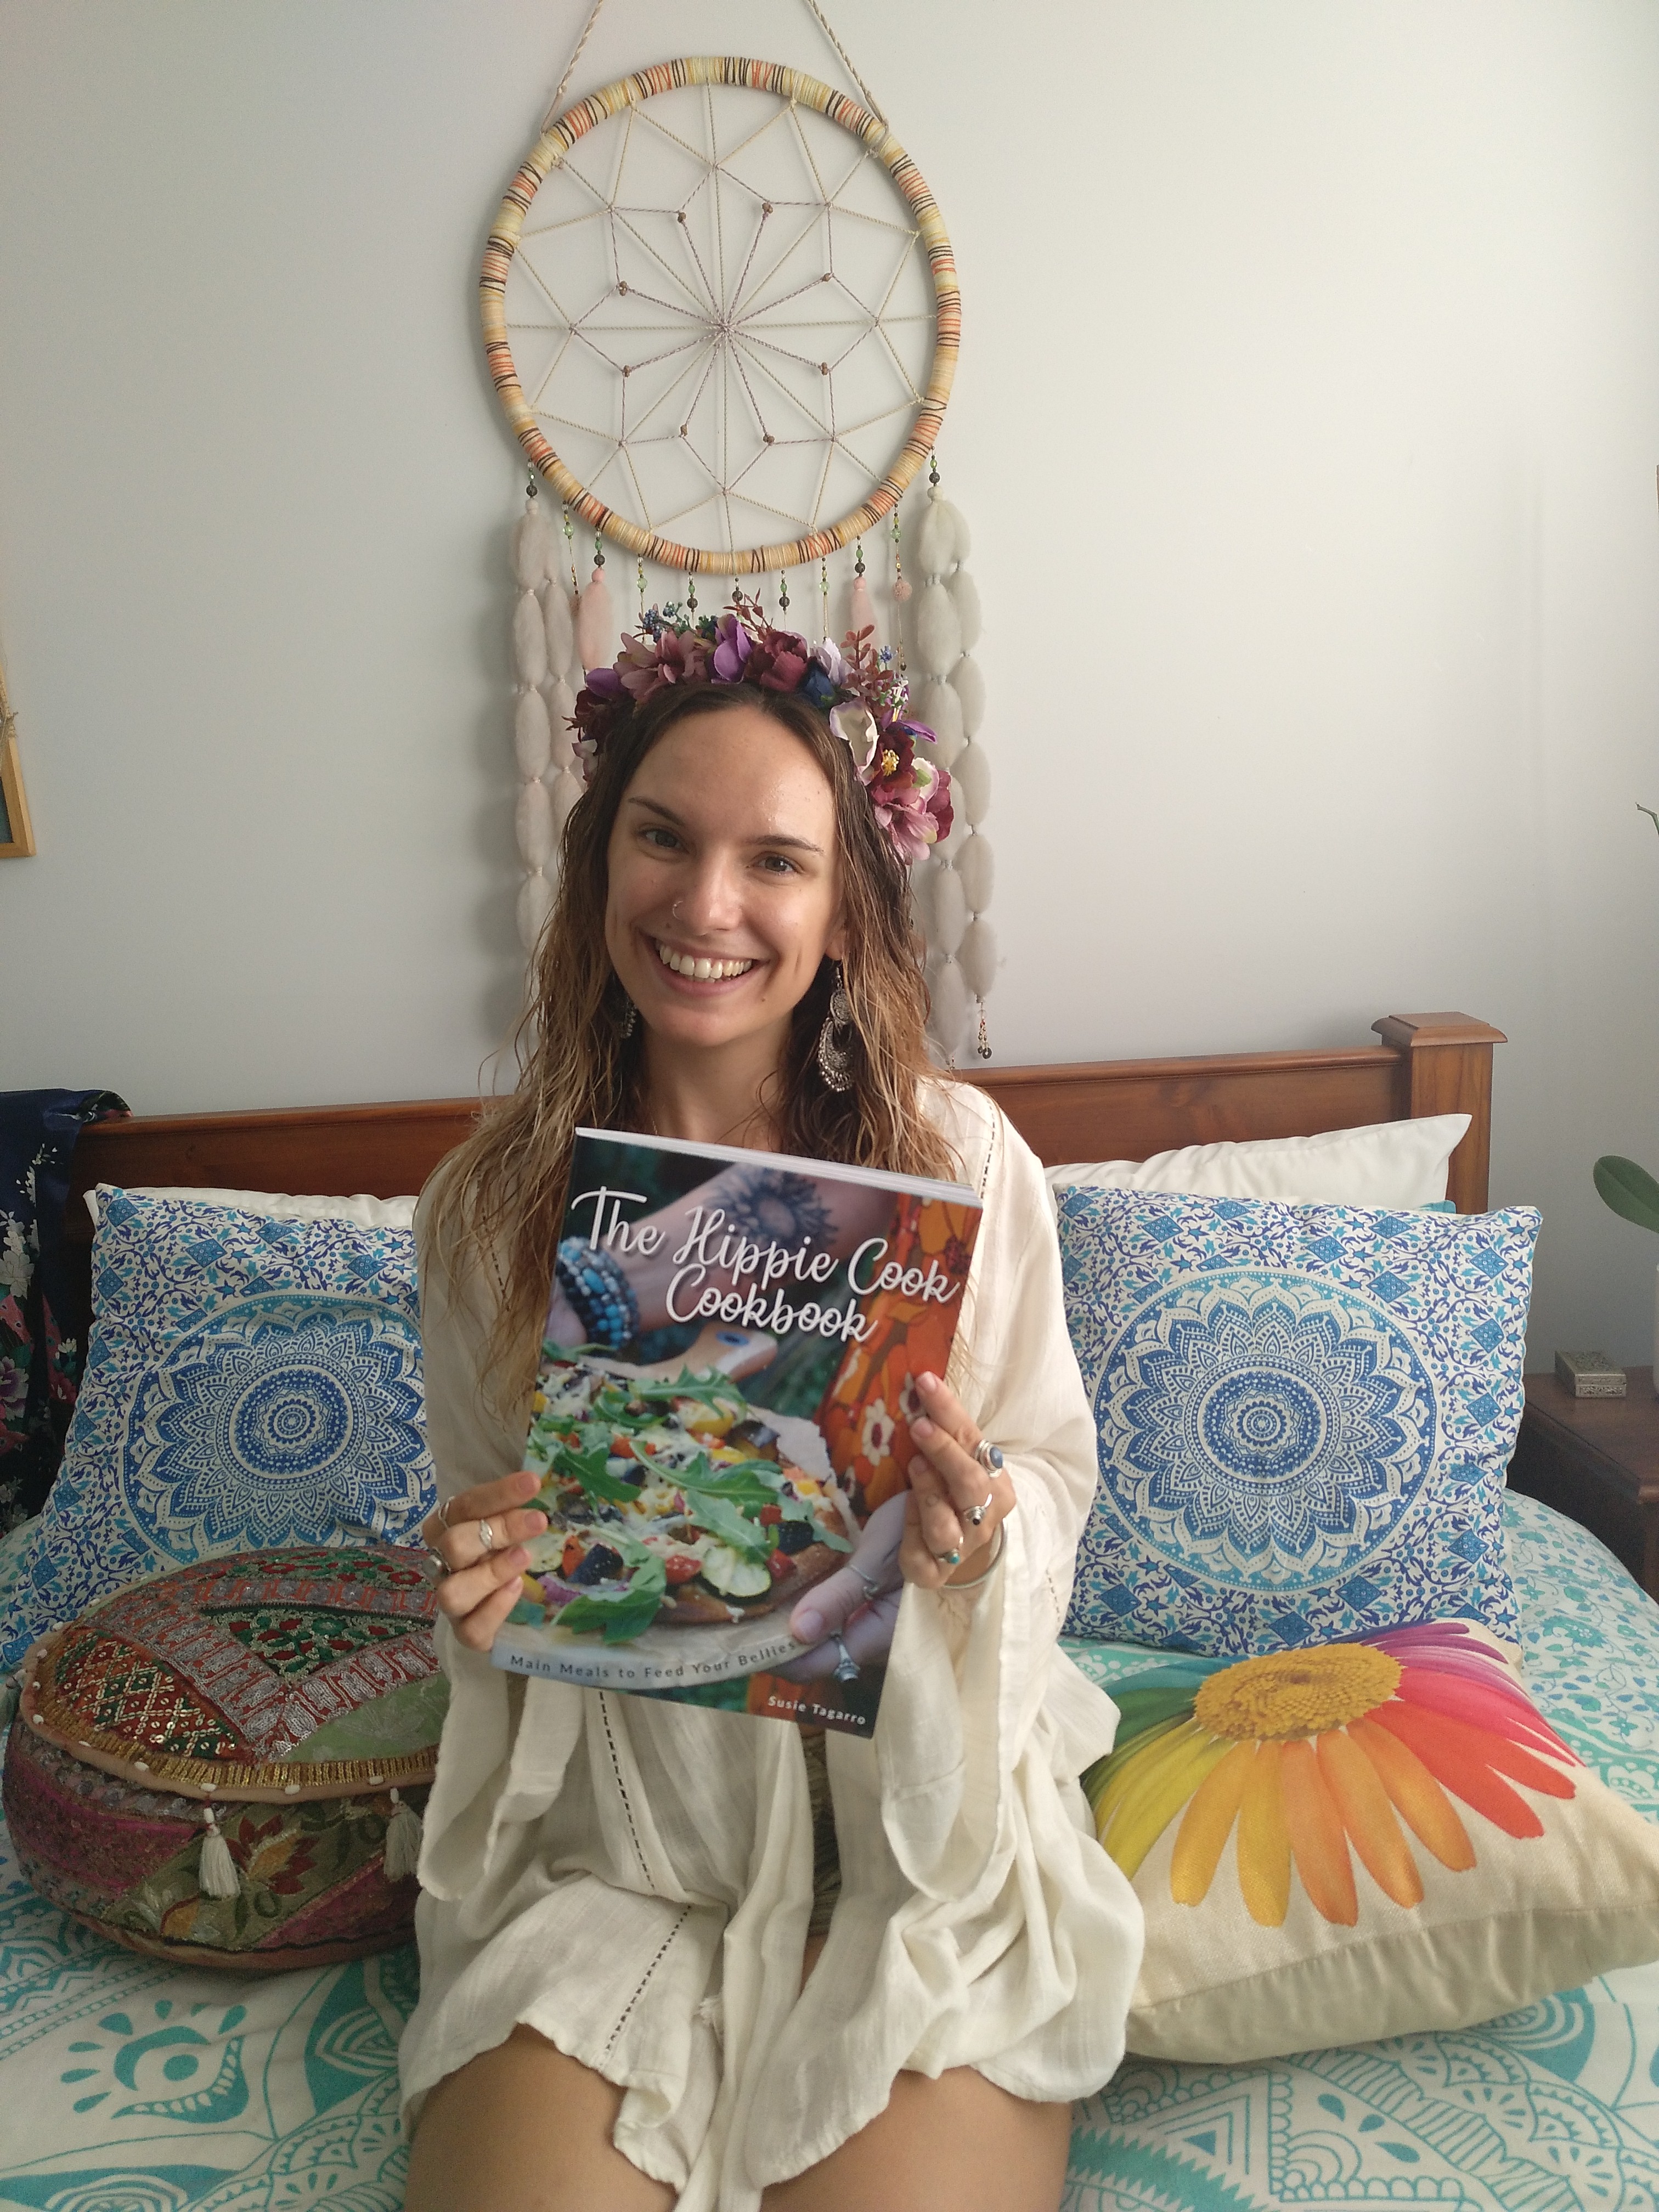 The Hippie Cook with her The Hippie Cook Cookbook